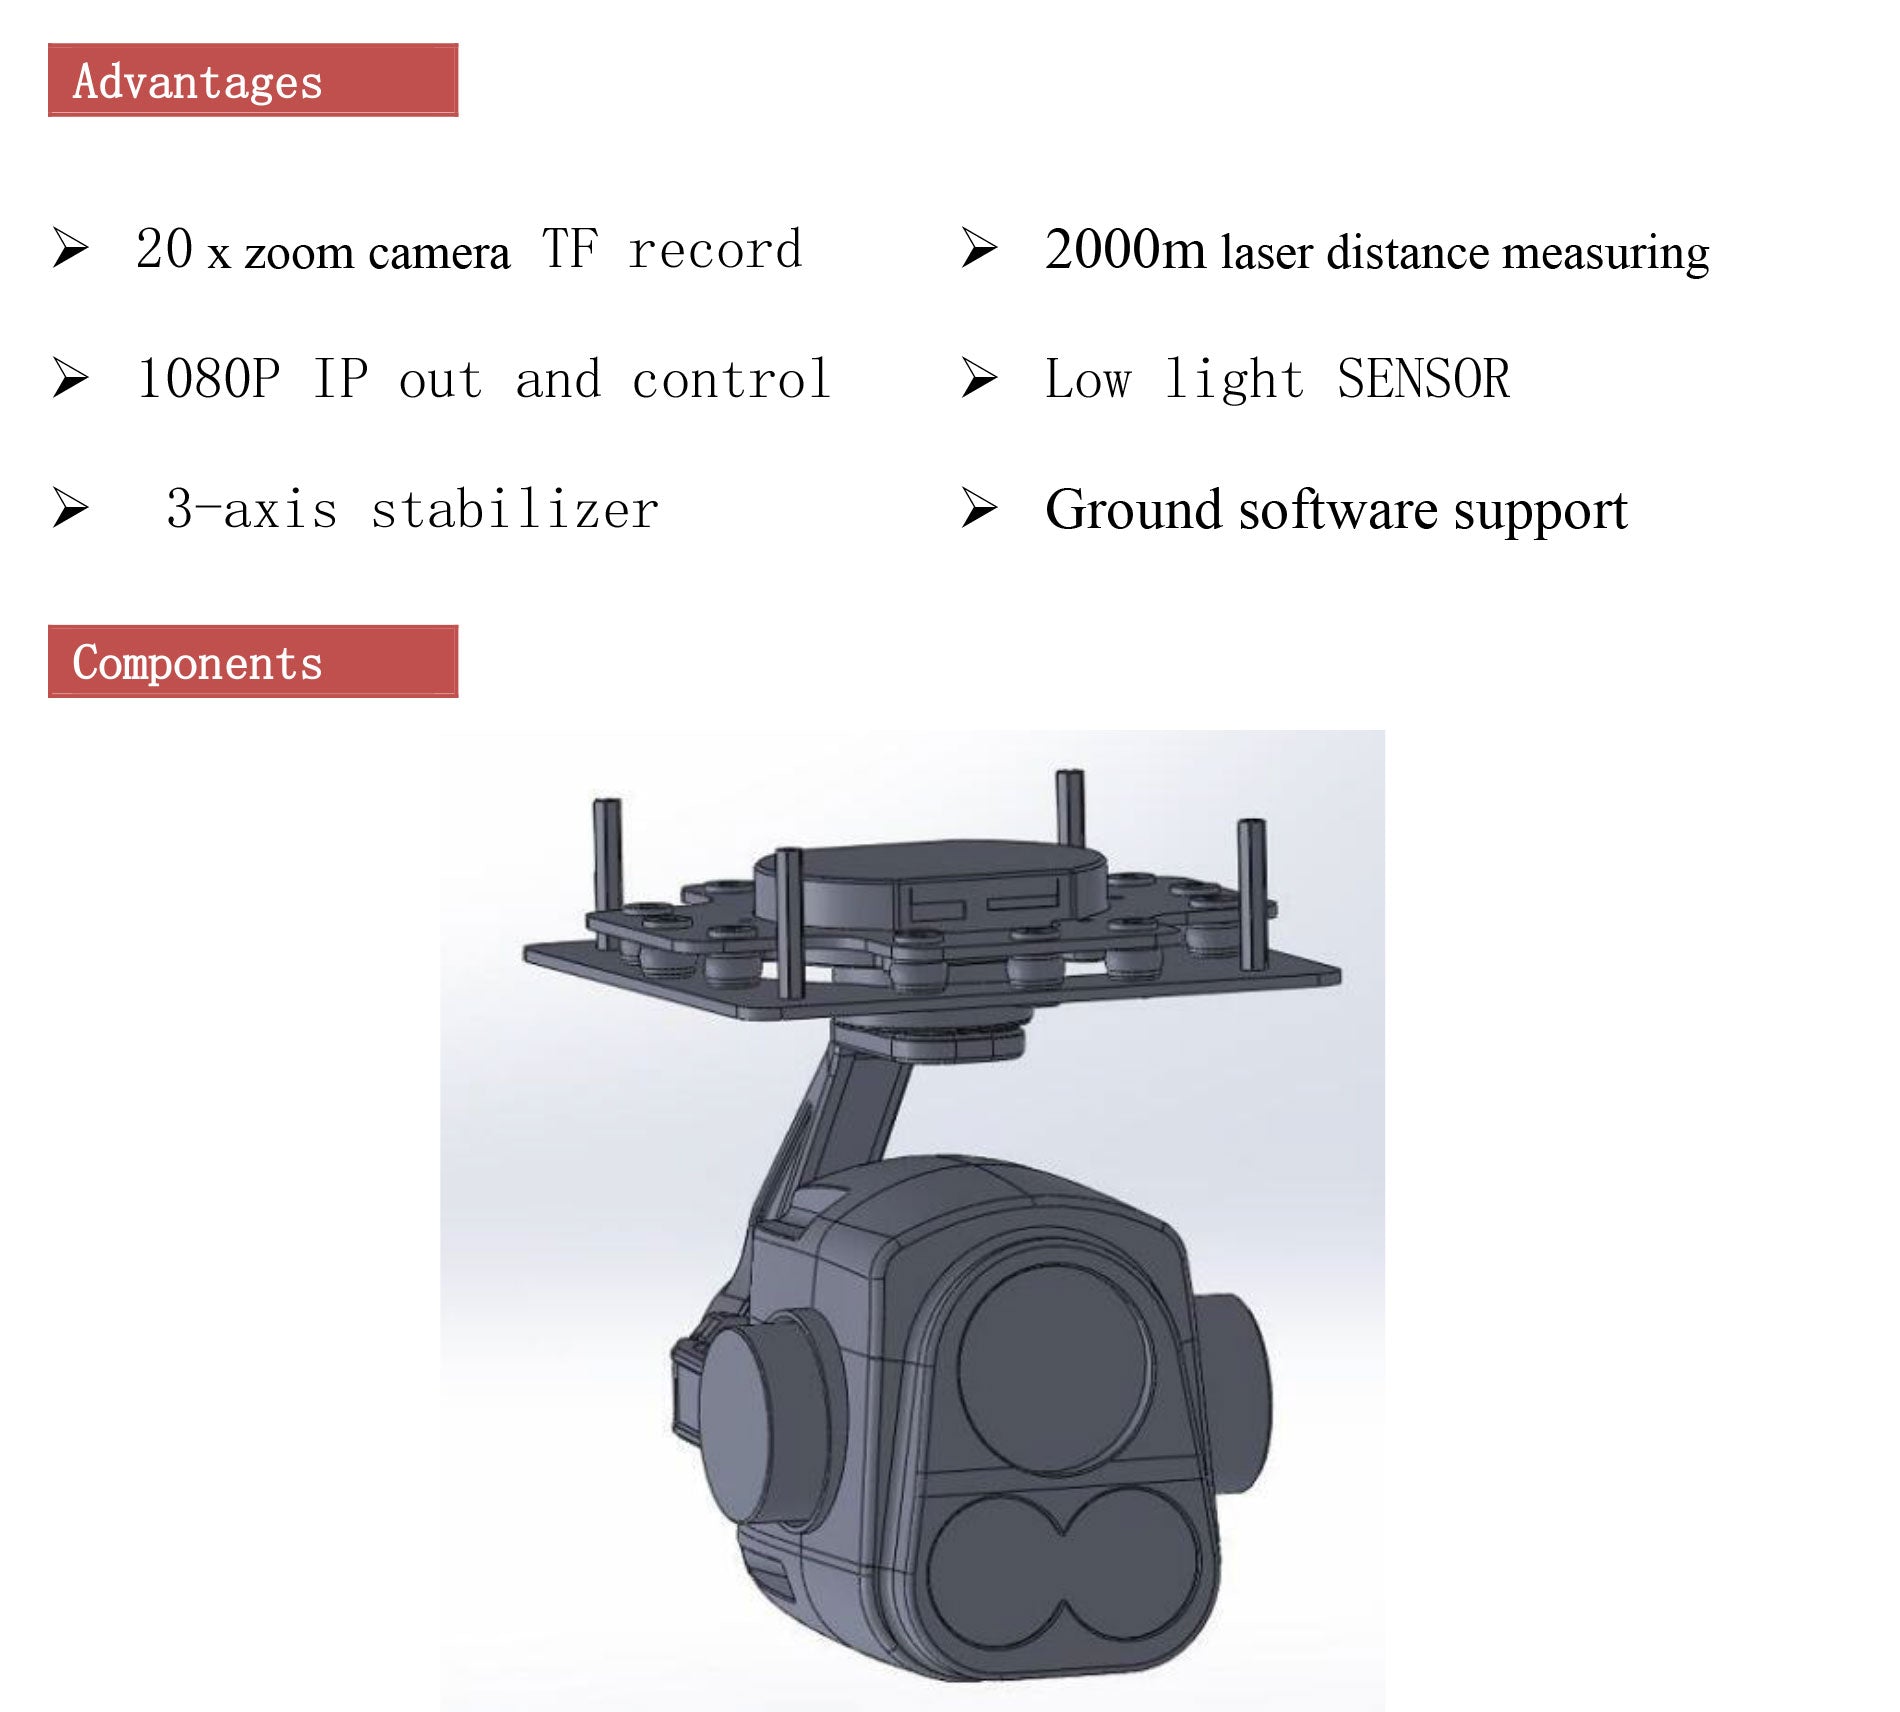 TOPOTEK LHT20S90 Drone Gimbal, Stabilized camera with 20x optical zoom, laser distance measurer, and high-quality video recording.